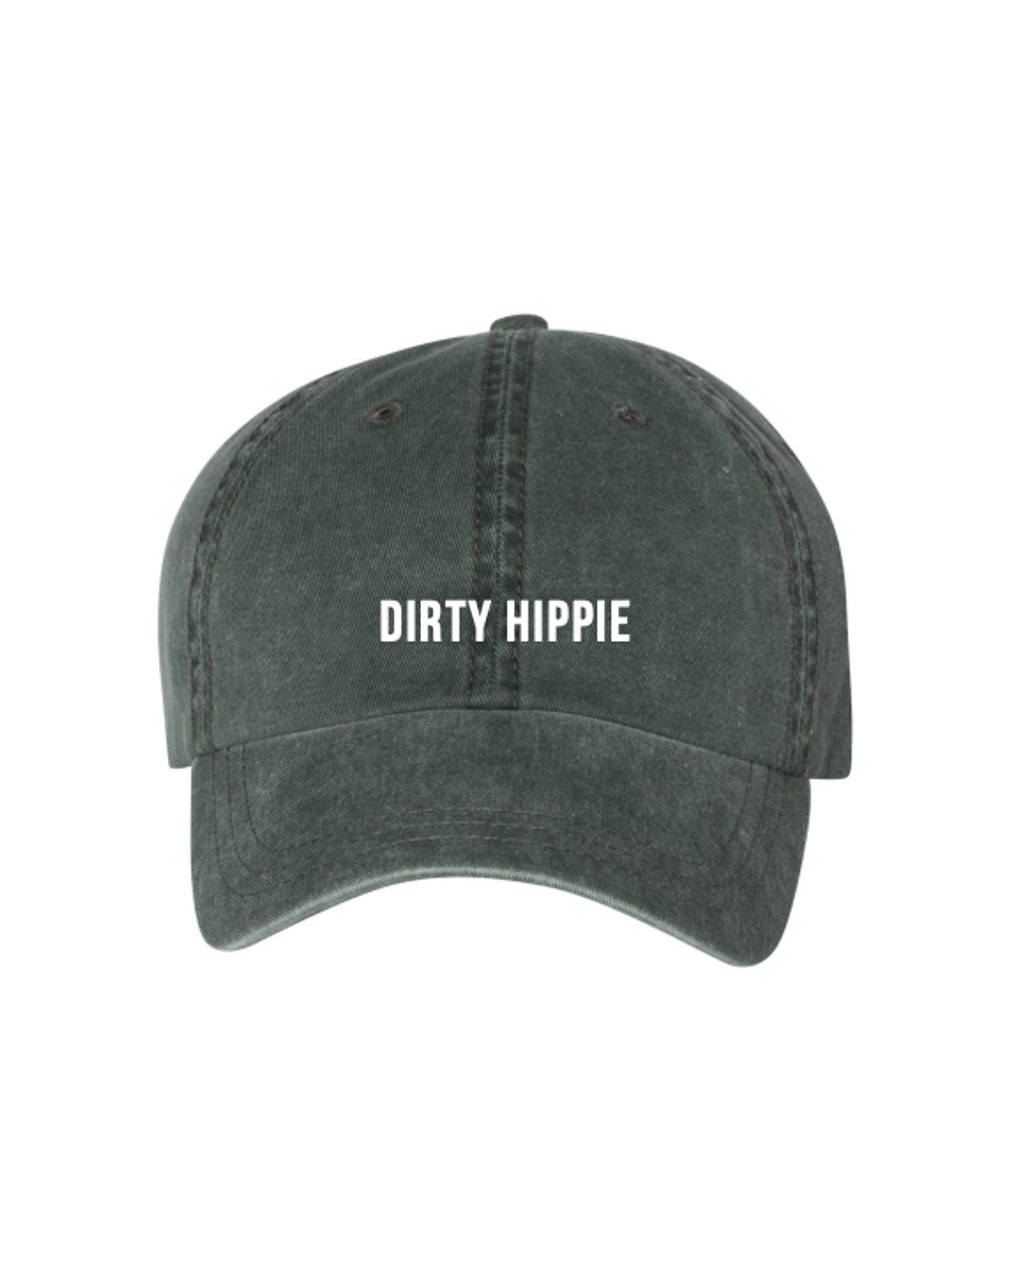 Southern Pressed Juicery Dirty Hippie Hat - SOLD OUT - Southern Pressed  Juicery